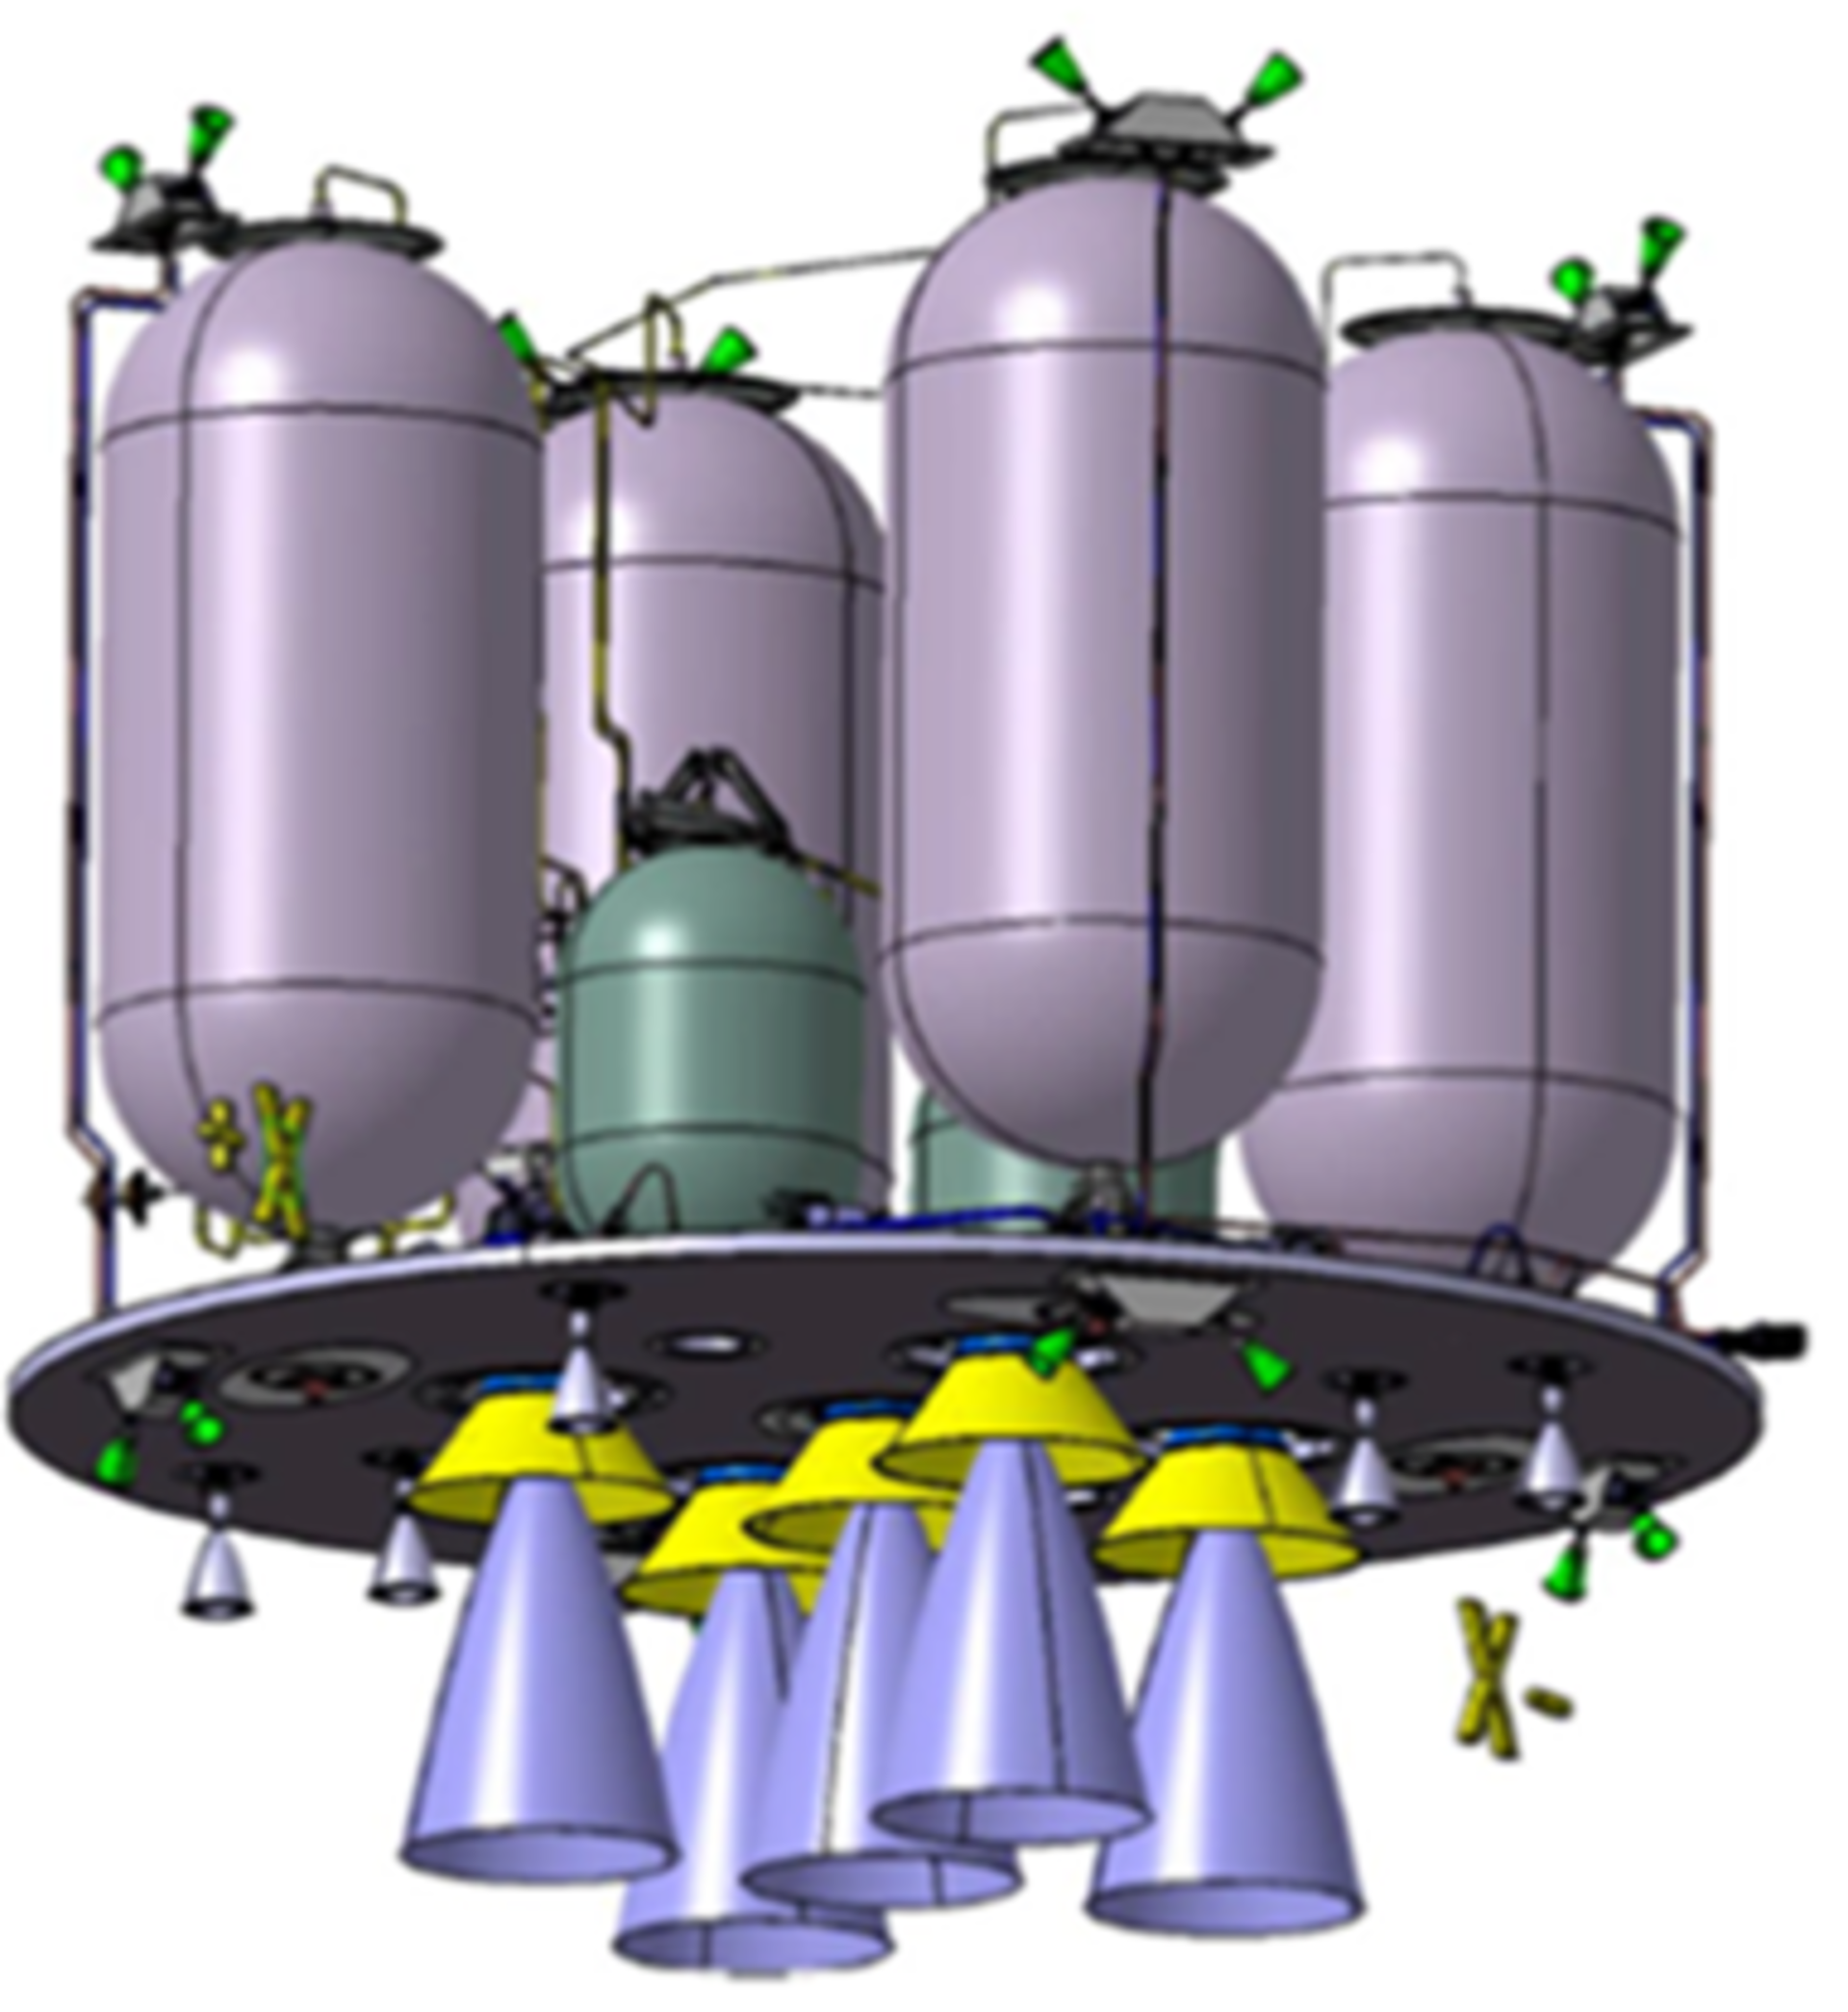 Fuel tanks and thrusters